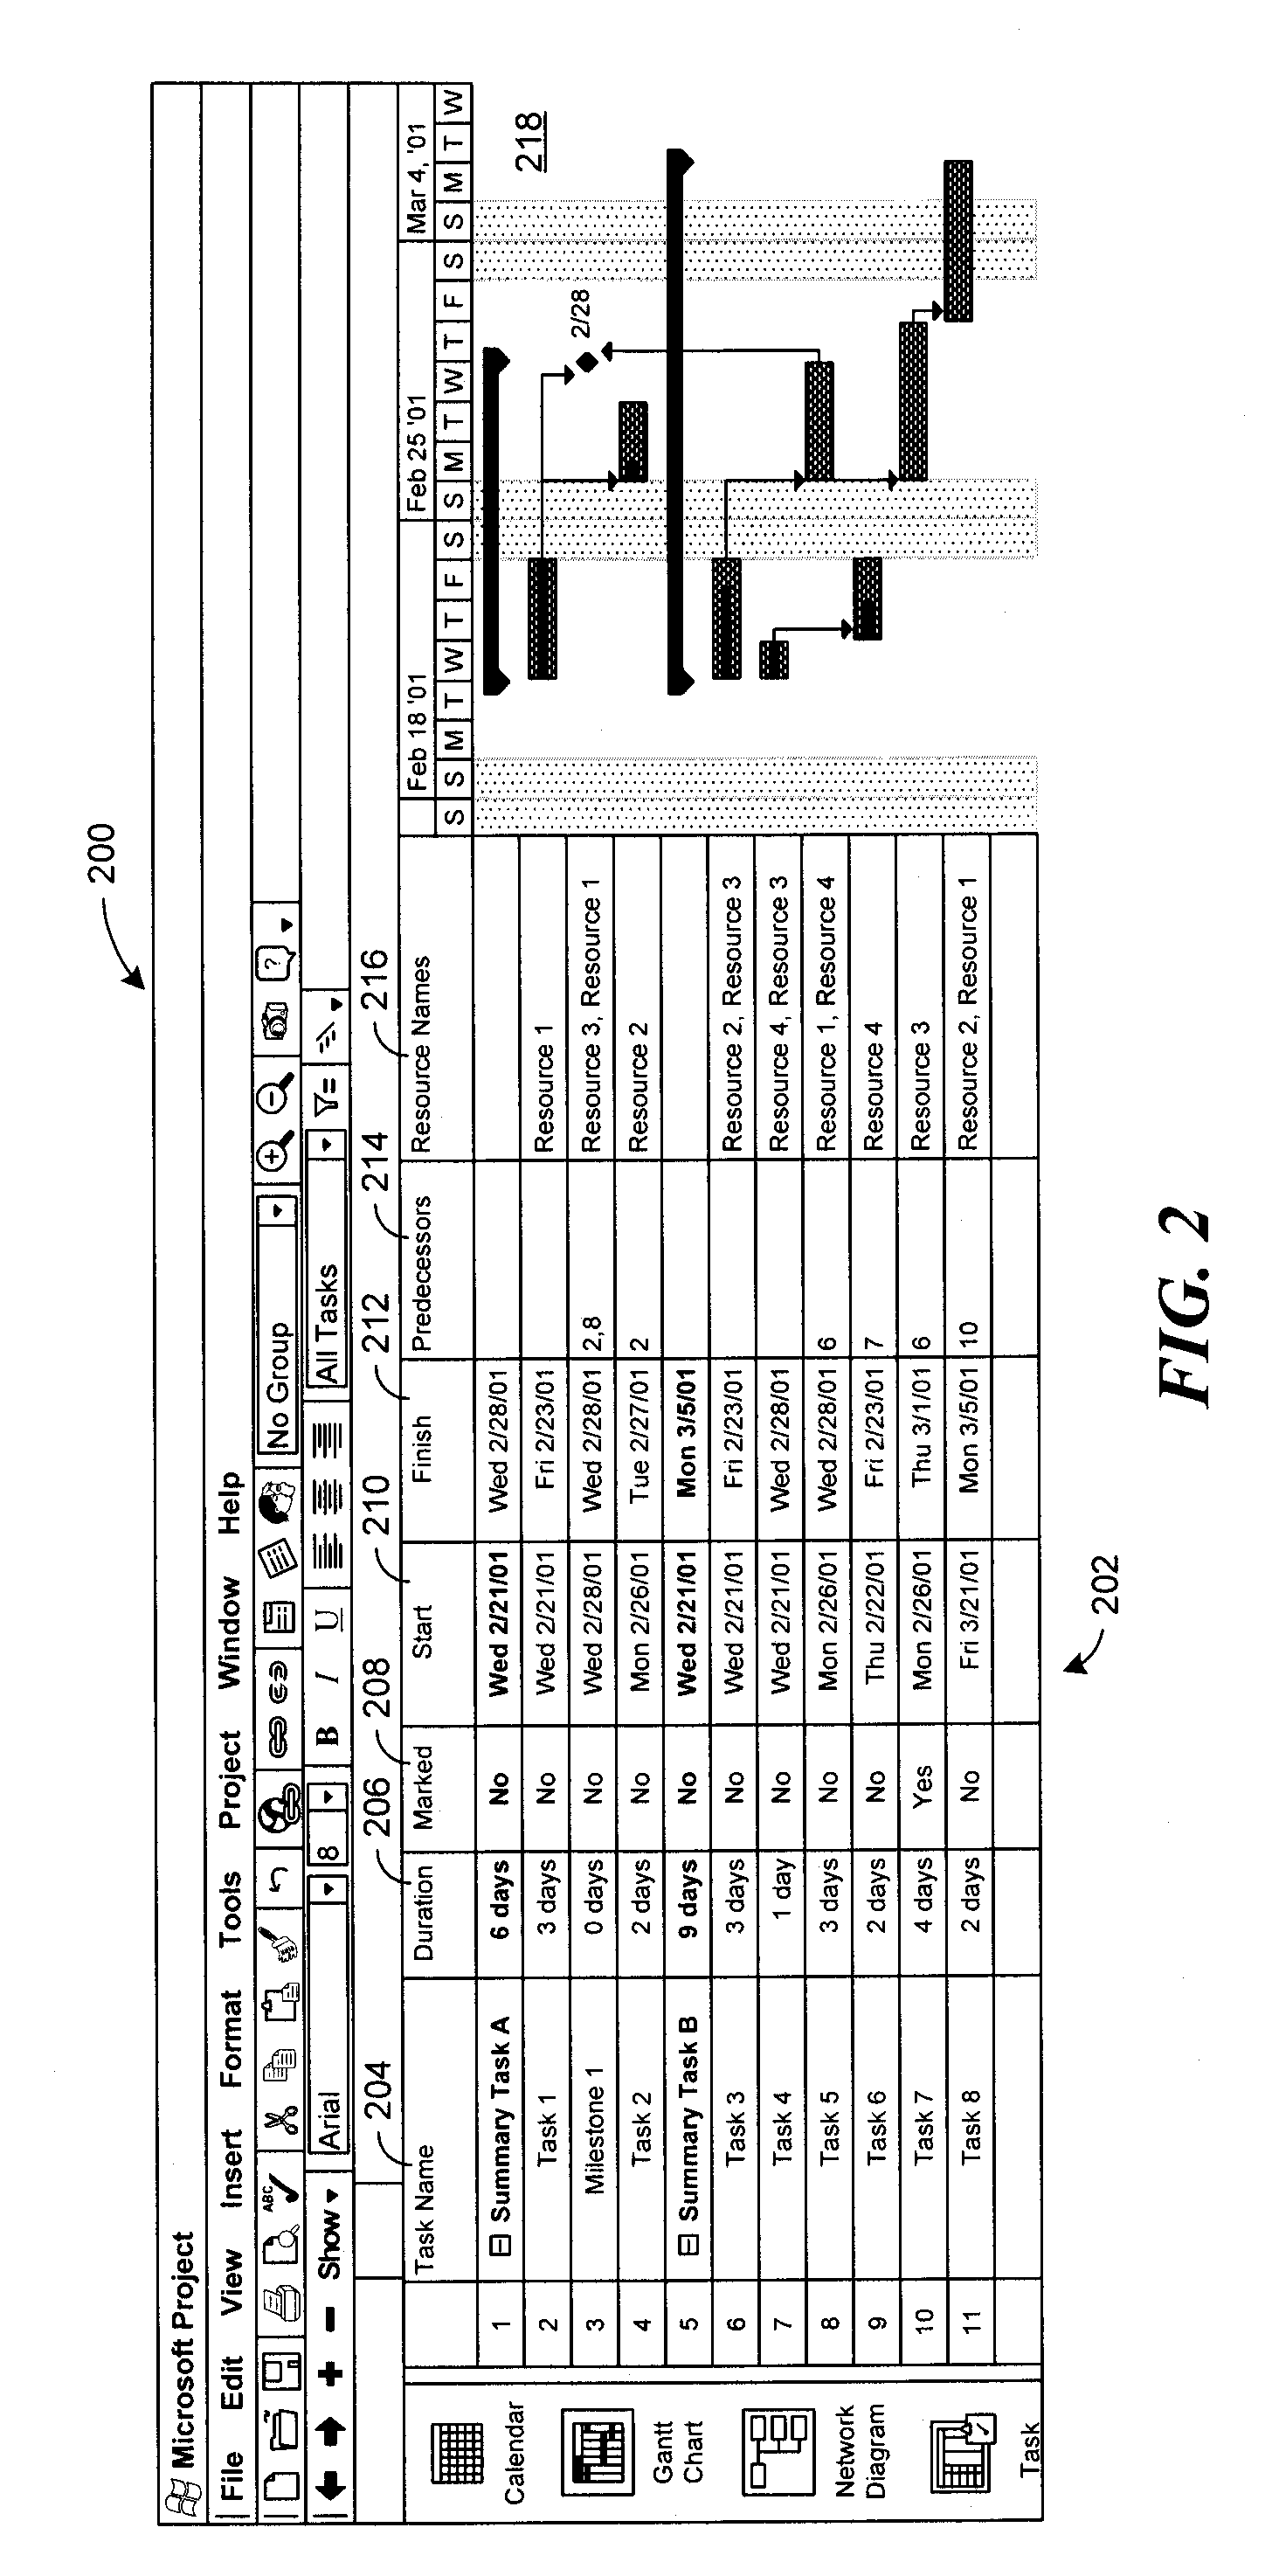 System and method for creating customizable nodes in a network diagram